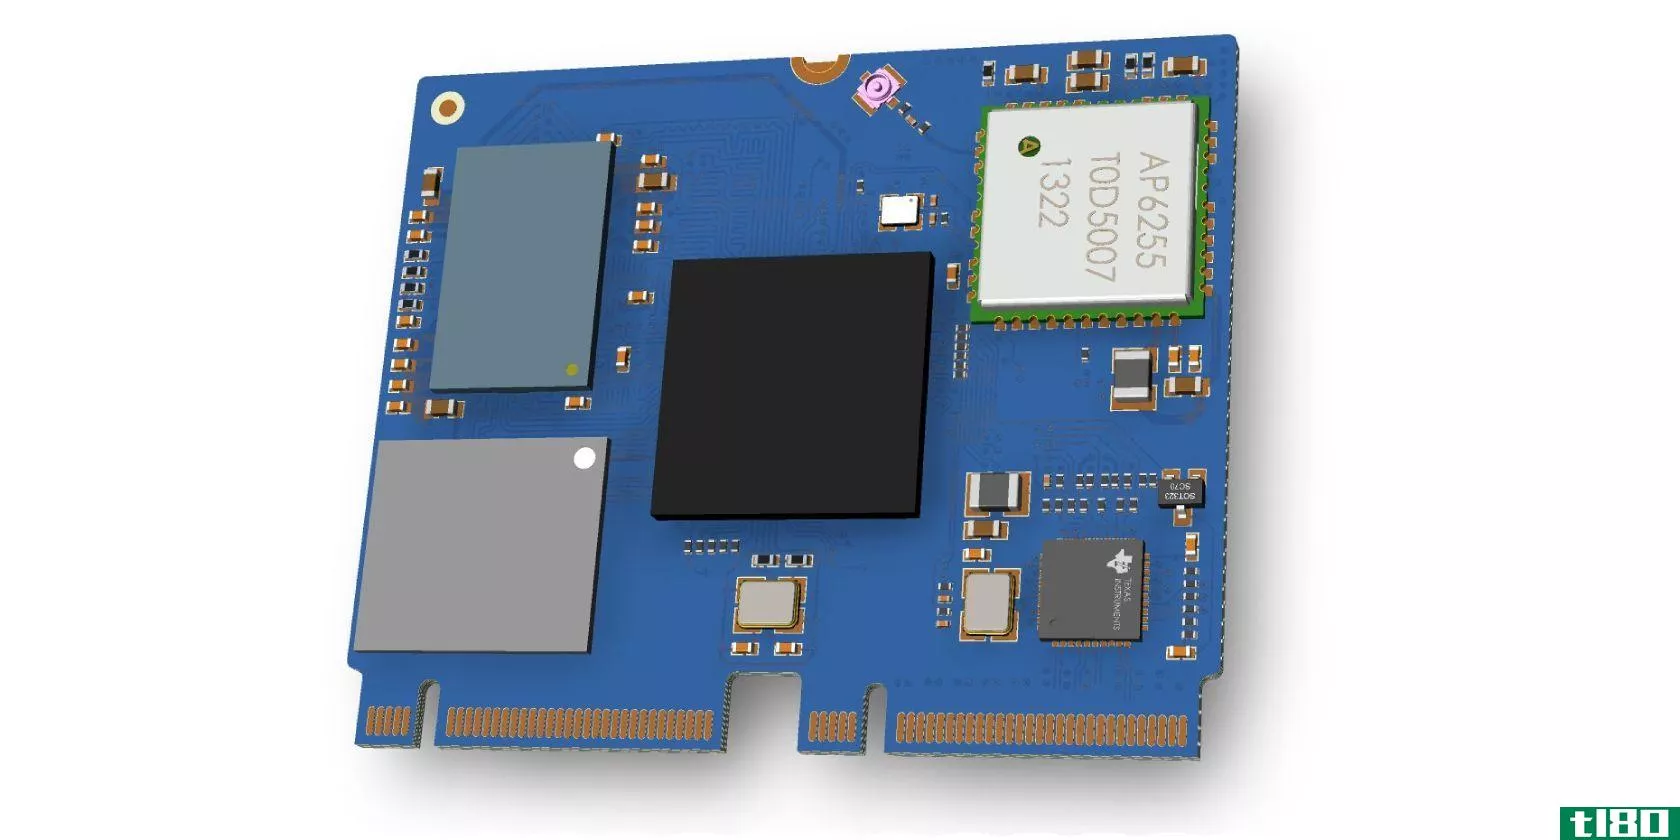 A mockup of one of the new RISC-V SoMs